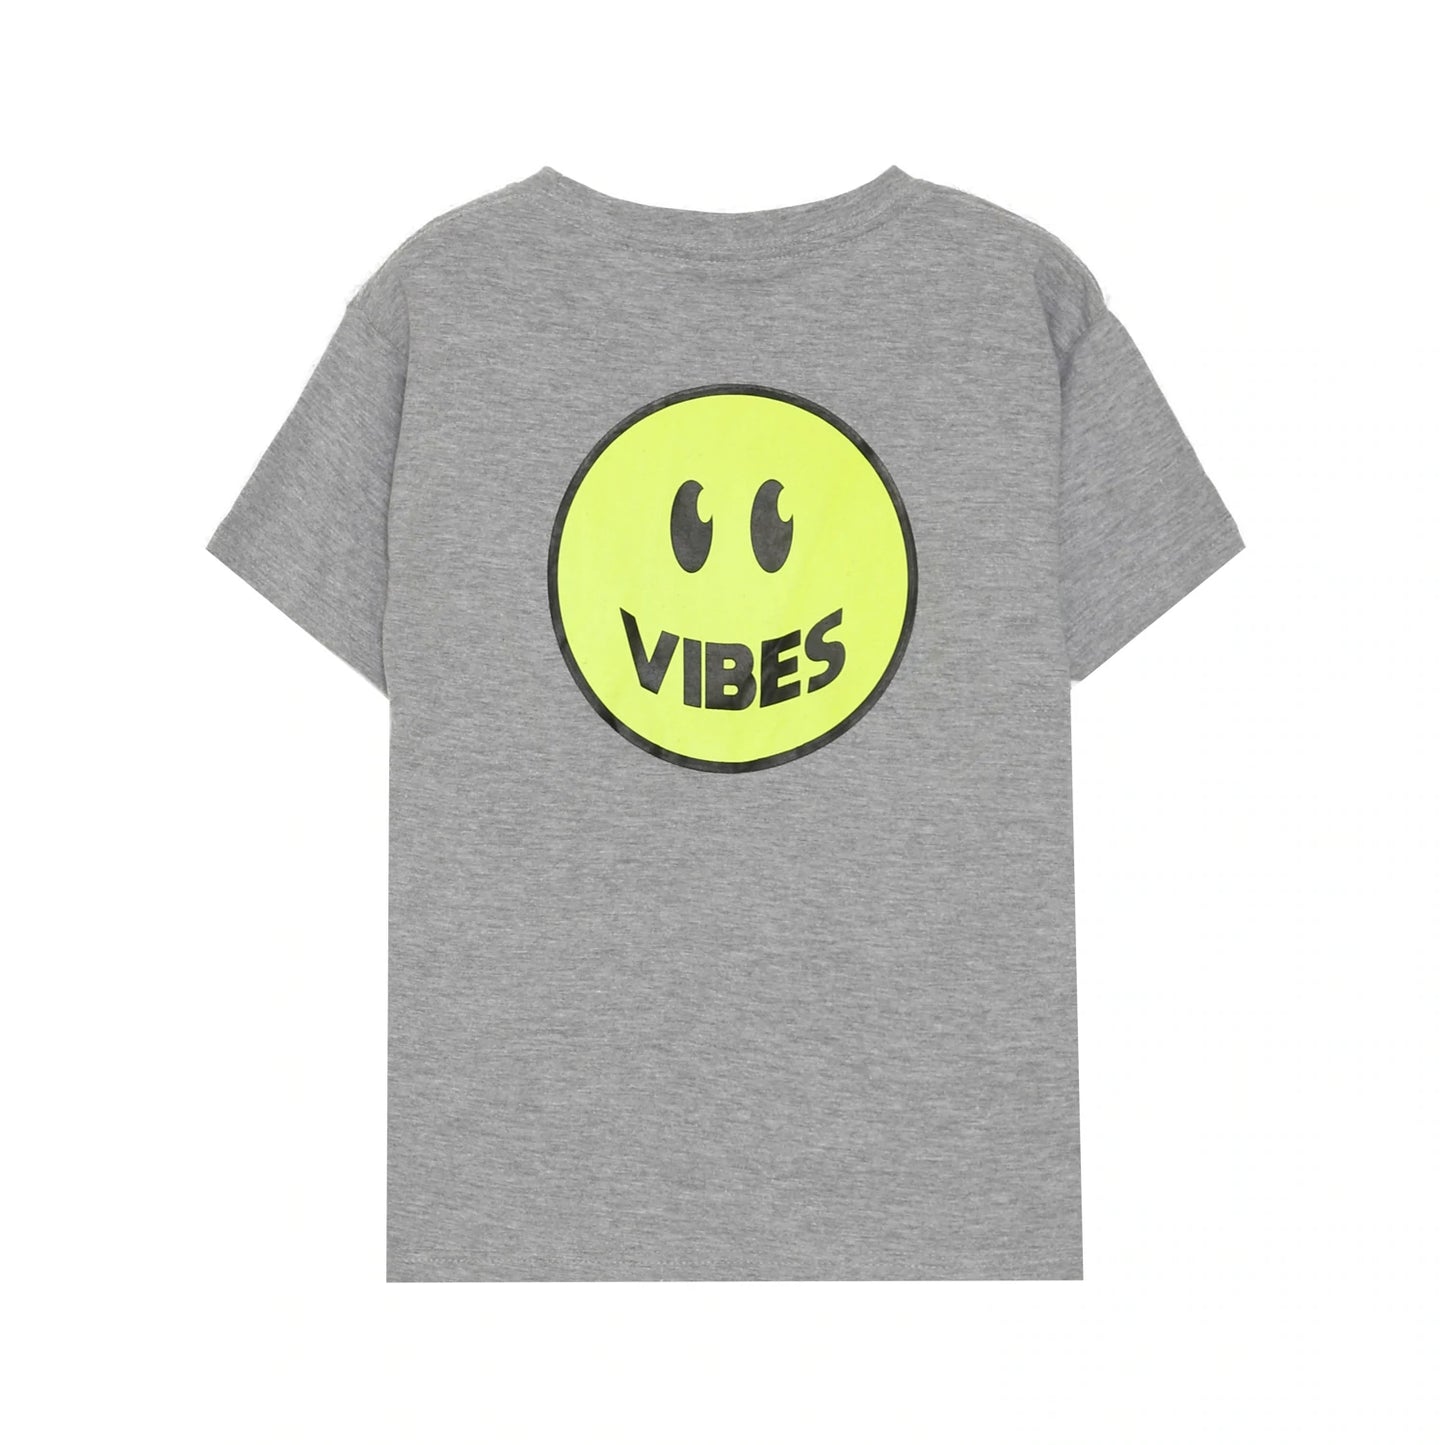 Aly Good Vibes - "Good Vibes" T-Shirt (Kids Size)